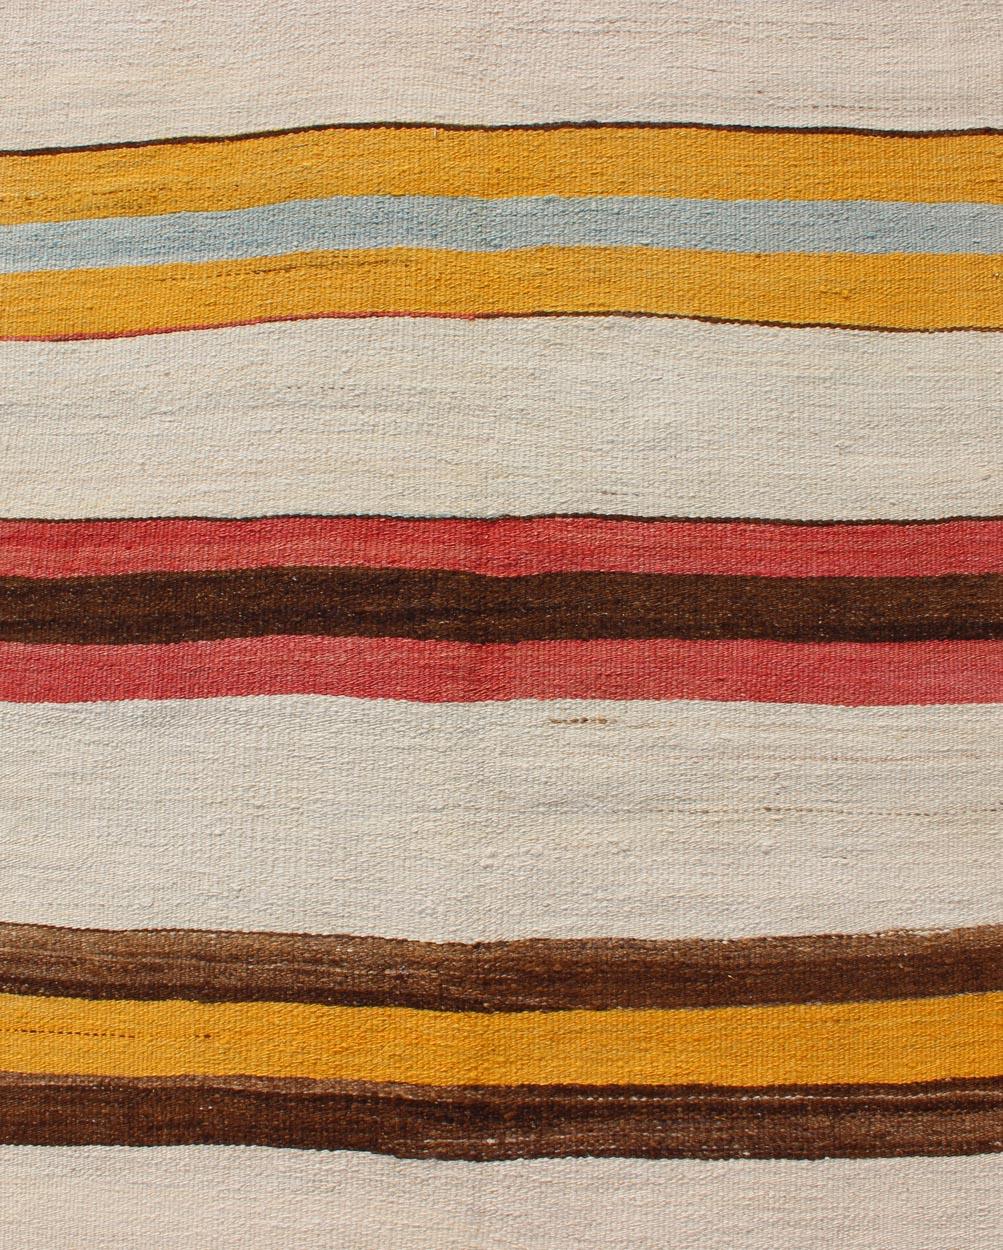 Mid-20th Century  Vintage Colorful Kilim Runner With Stripe Design in Yellow, Ivory, Red & Brown  For Sale